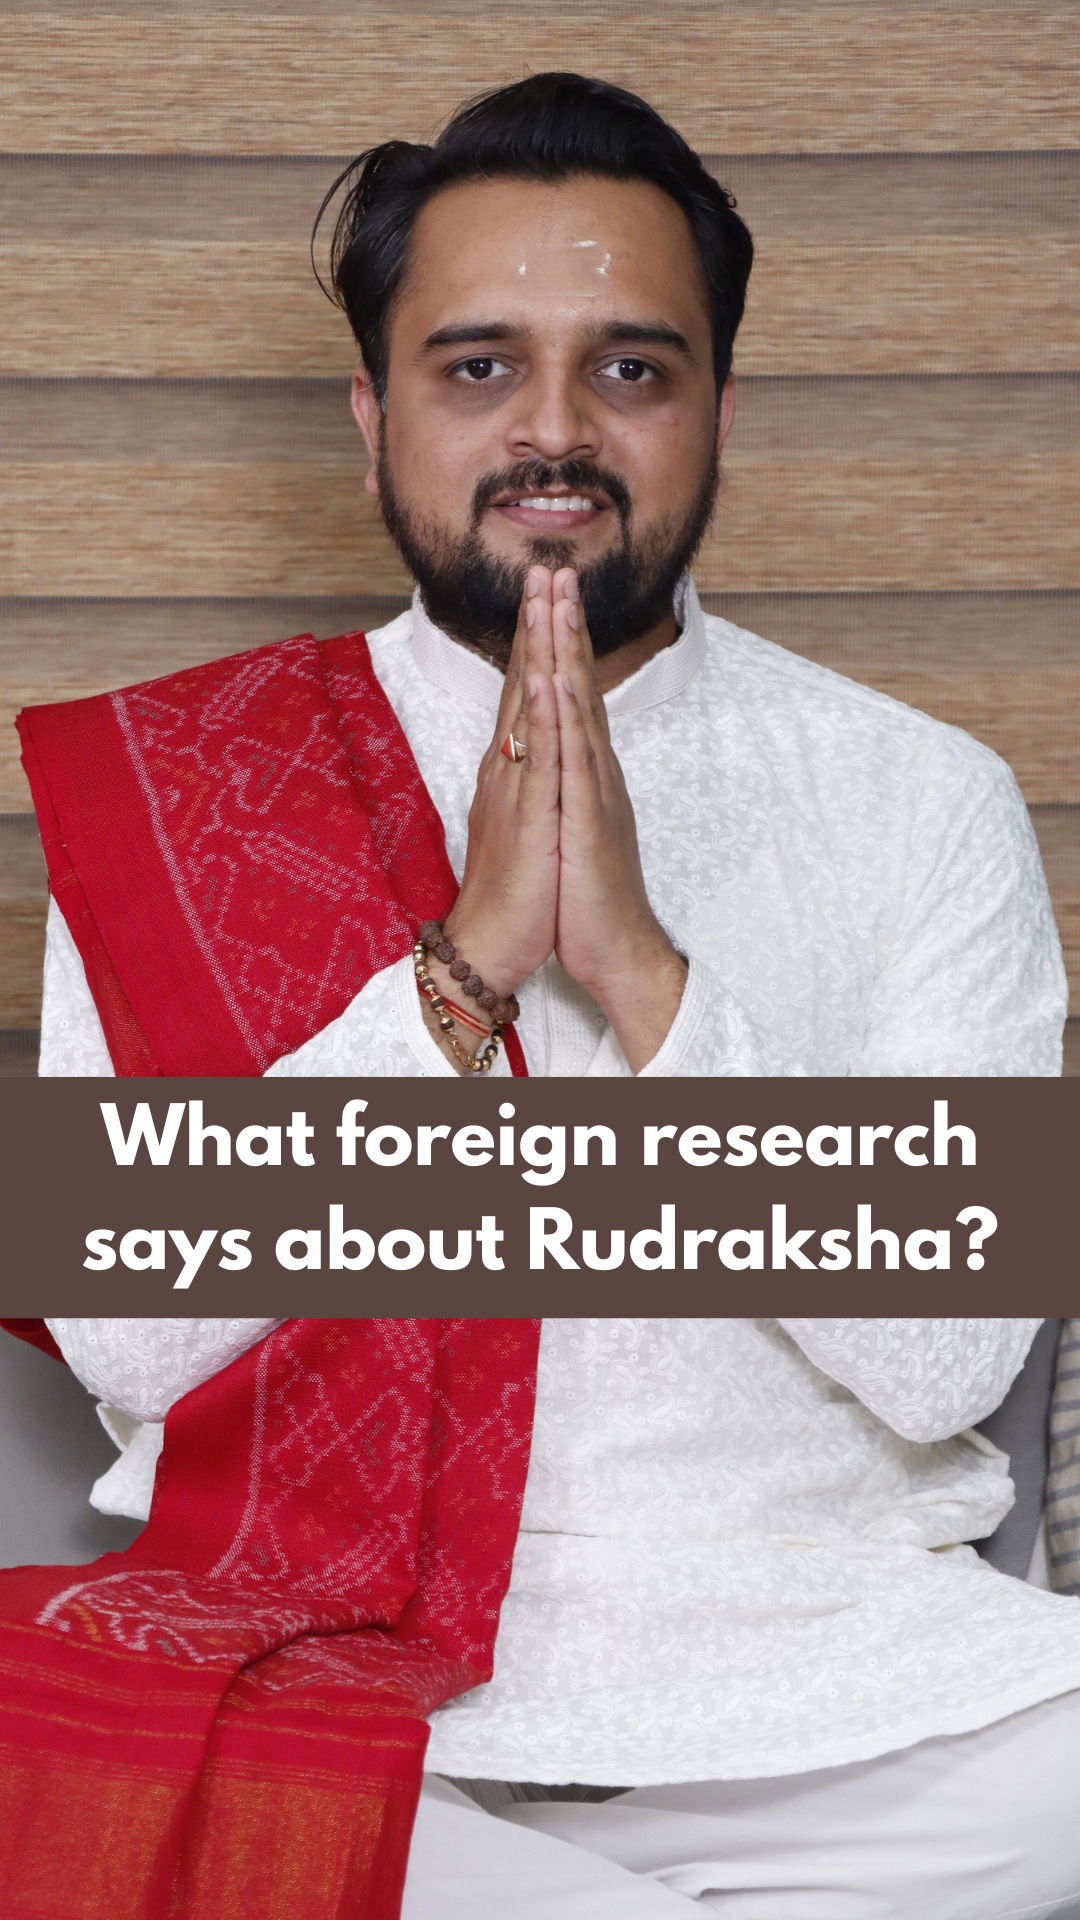 What foreign research says about Rudraksha